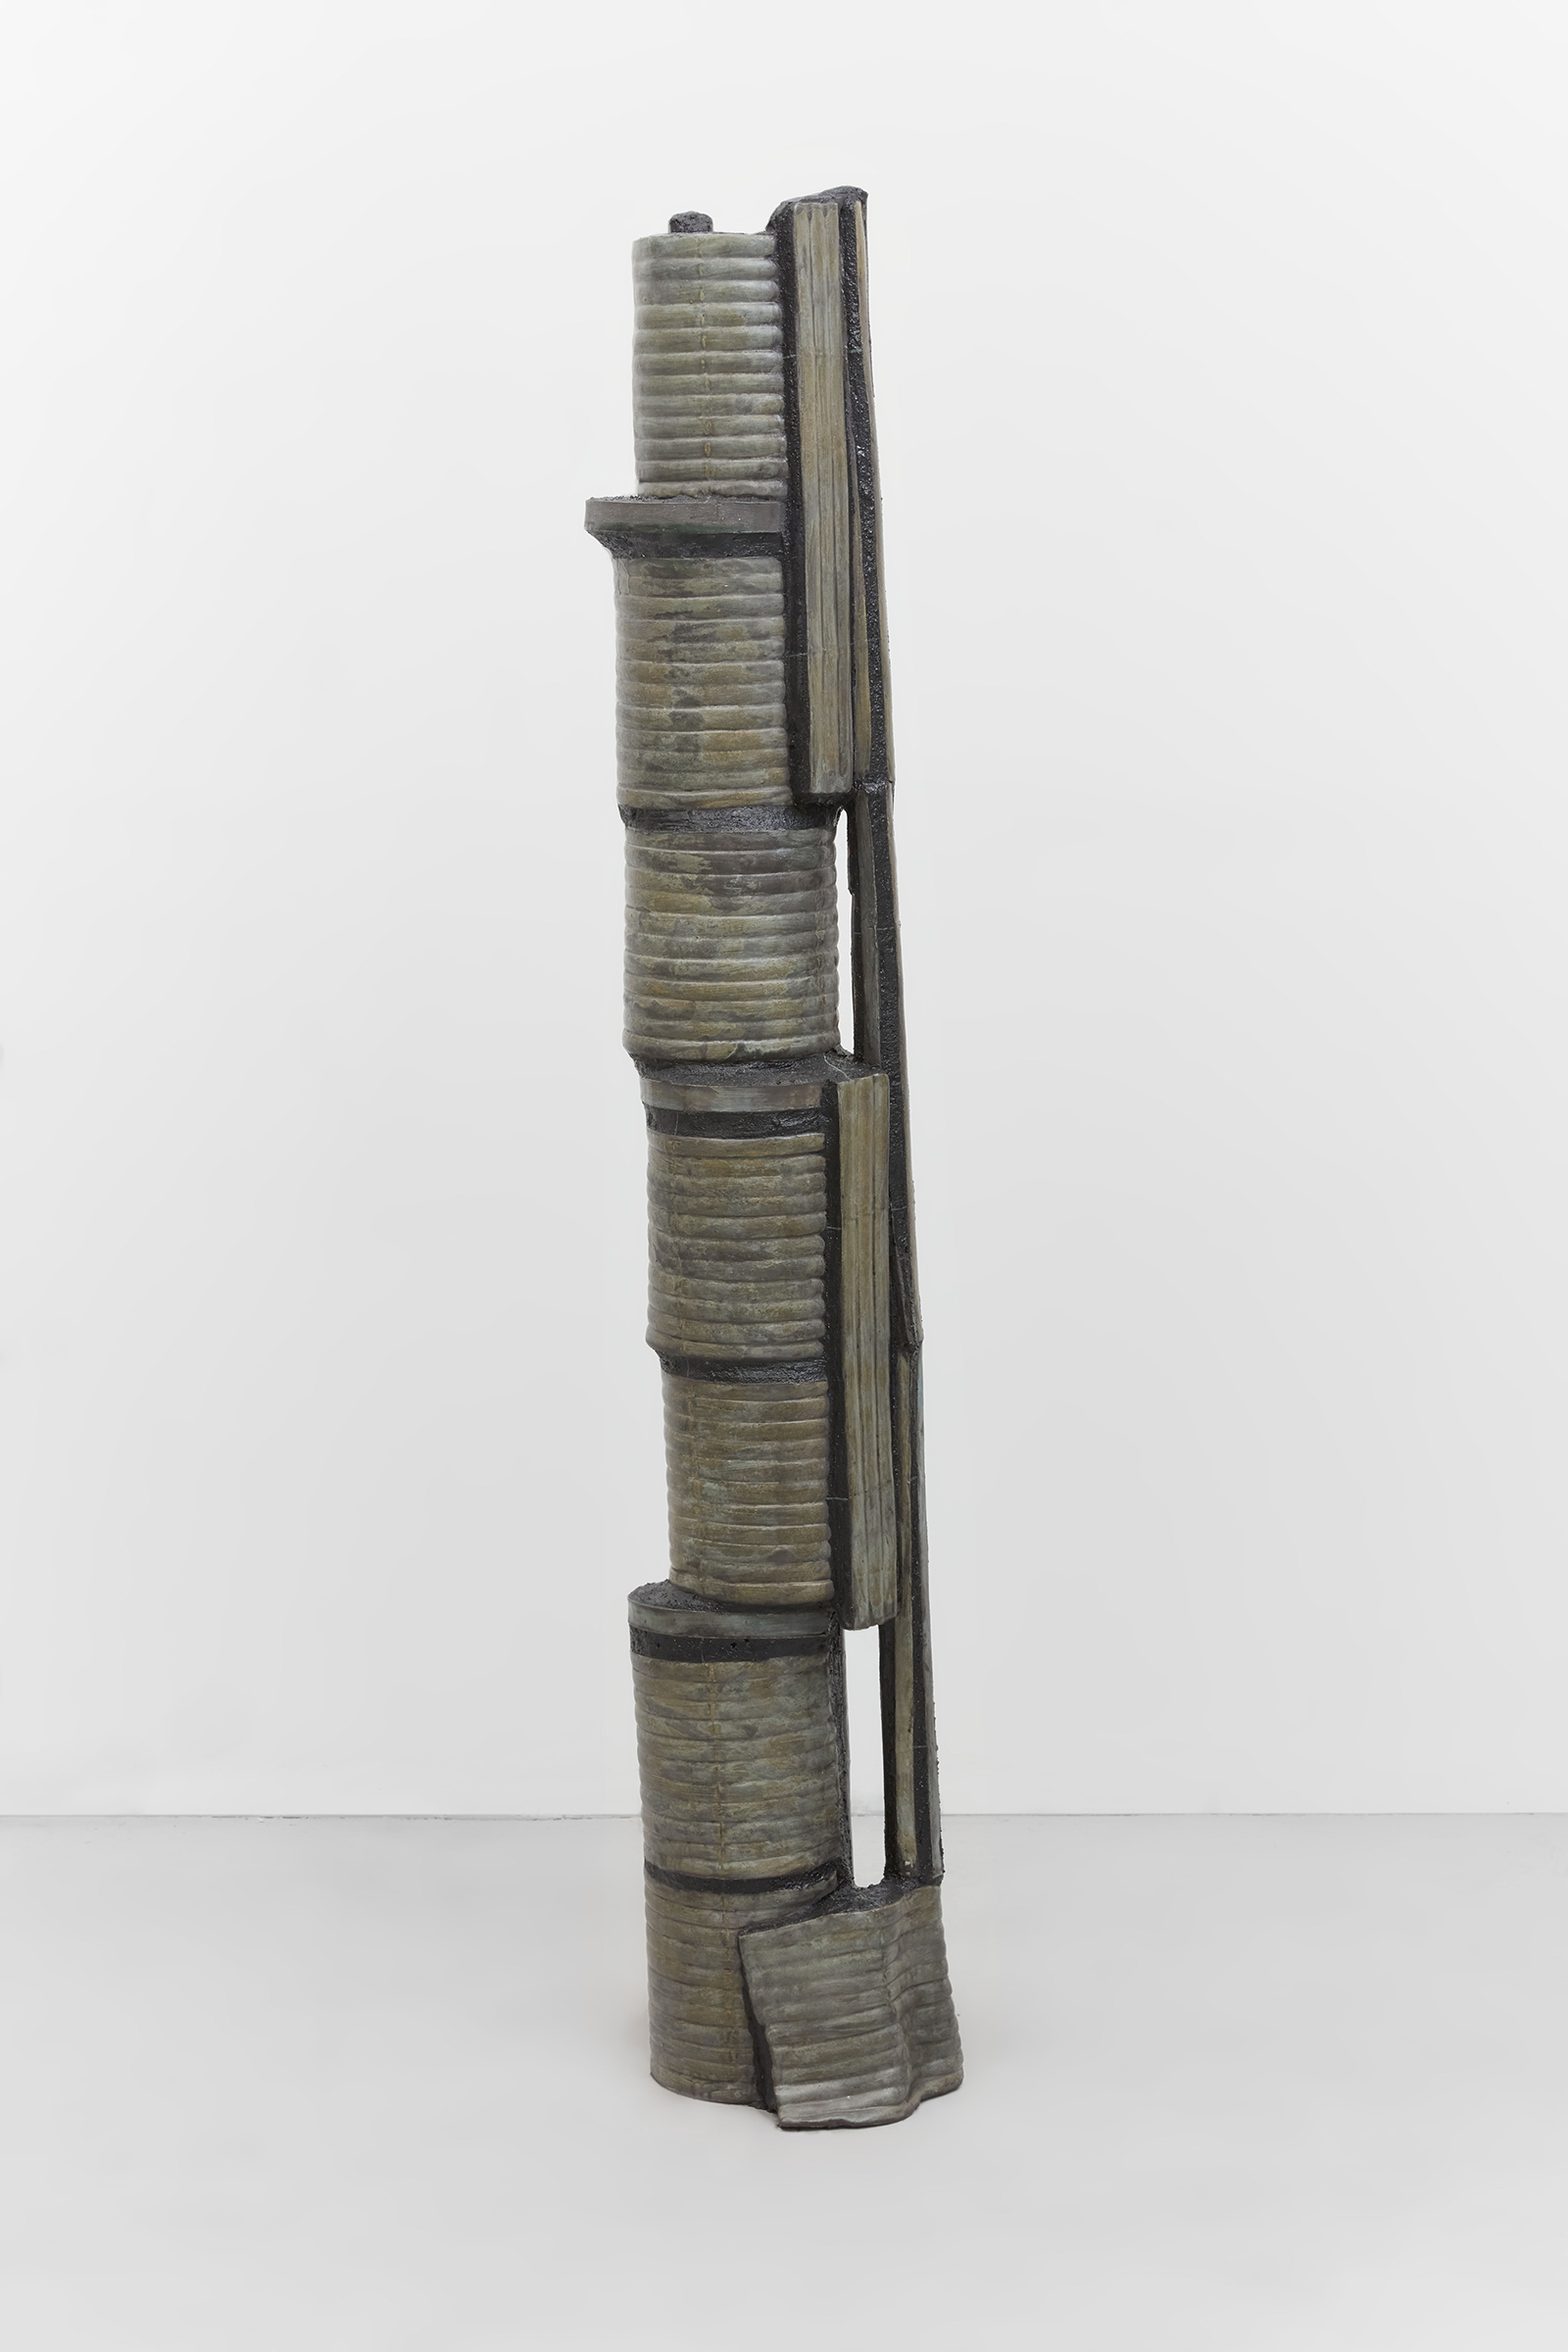 Anne Libby, Leaf Lift, 2020, Glazed ceramic, steel, sanded grout, 72.25h x 12w x 12d in.